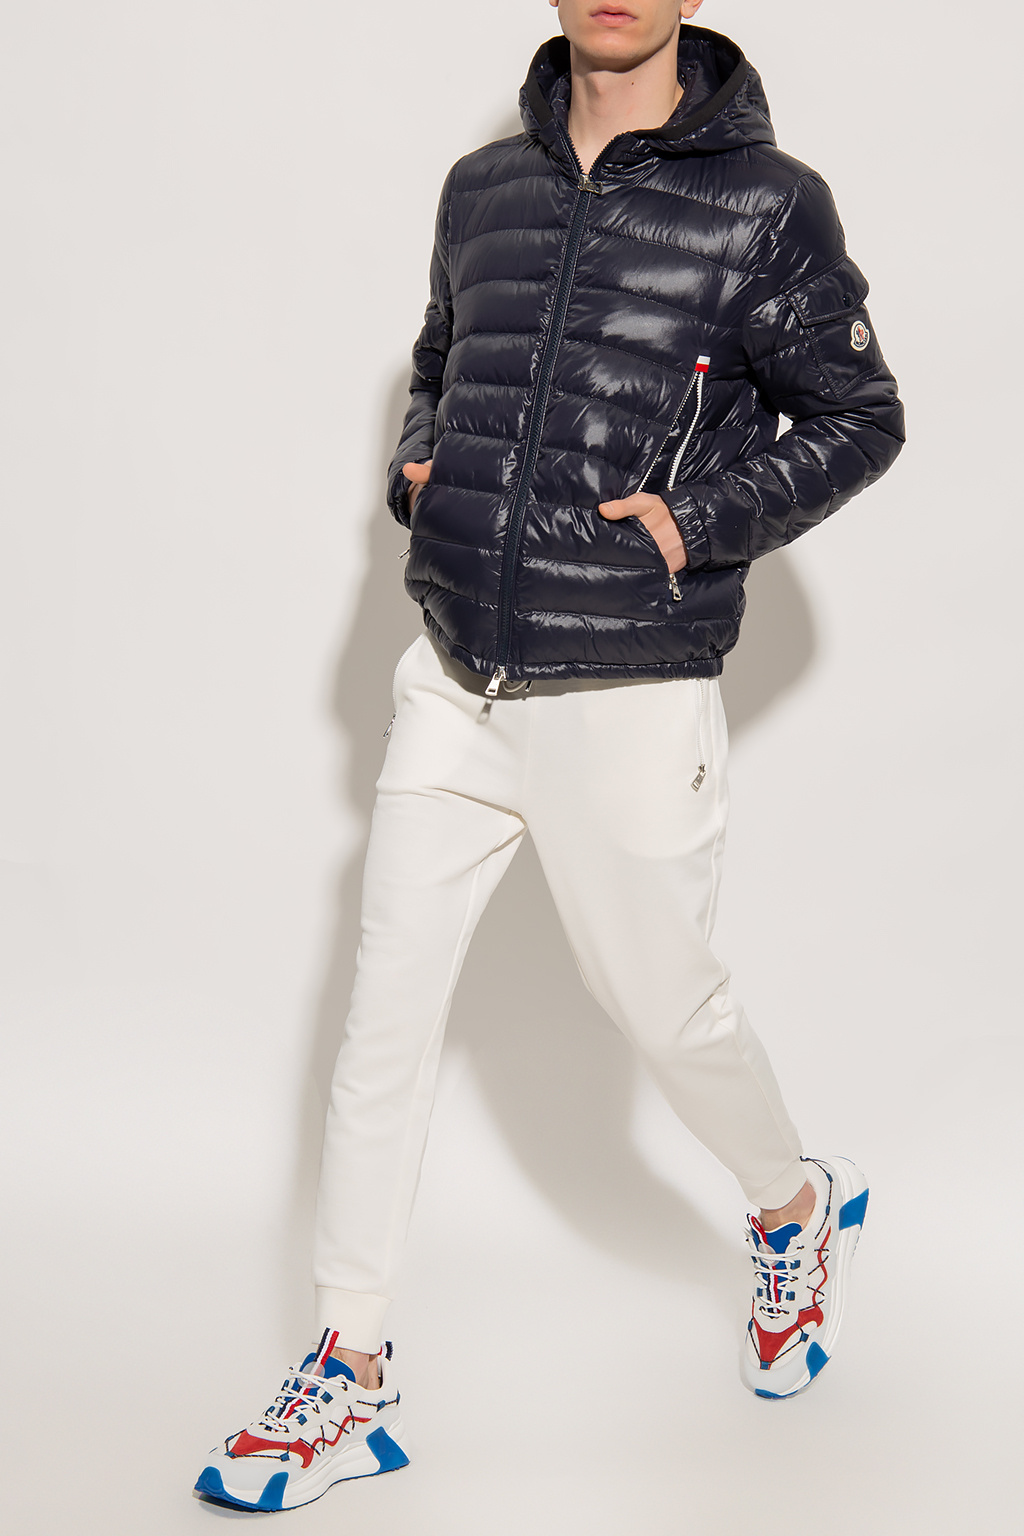 Galion' hooded down jacket the Moncler - IetpShops Cyprus 